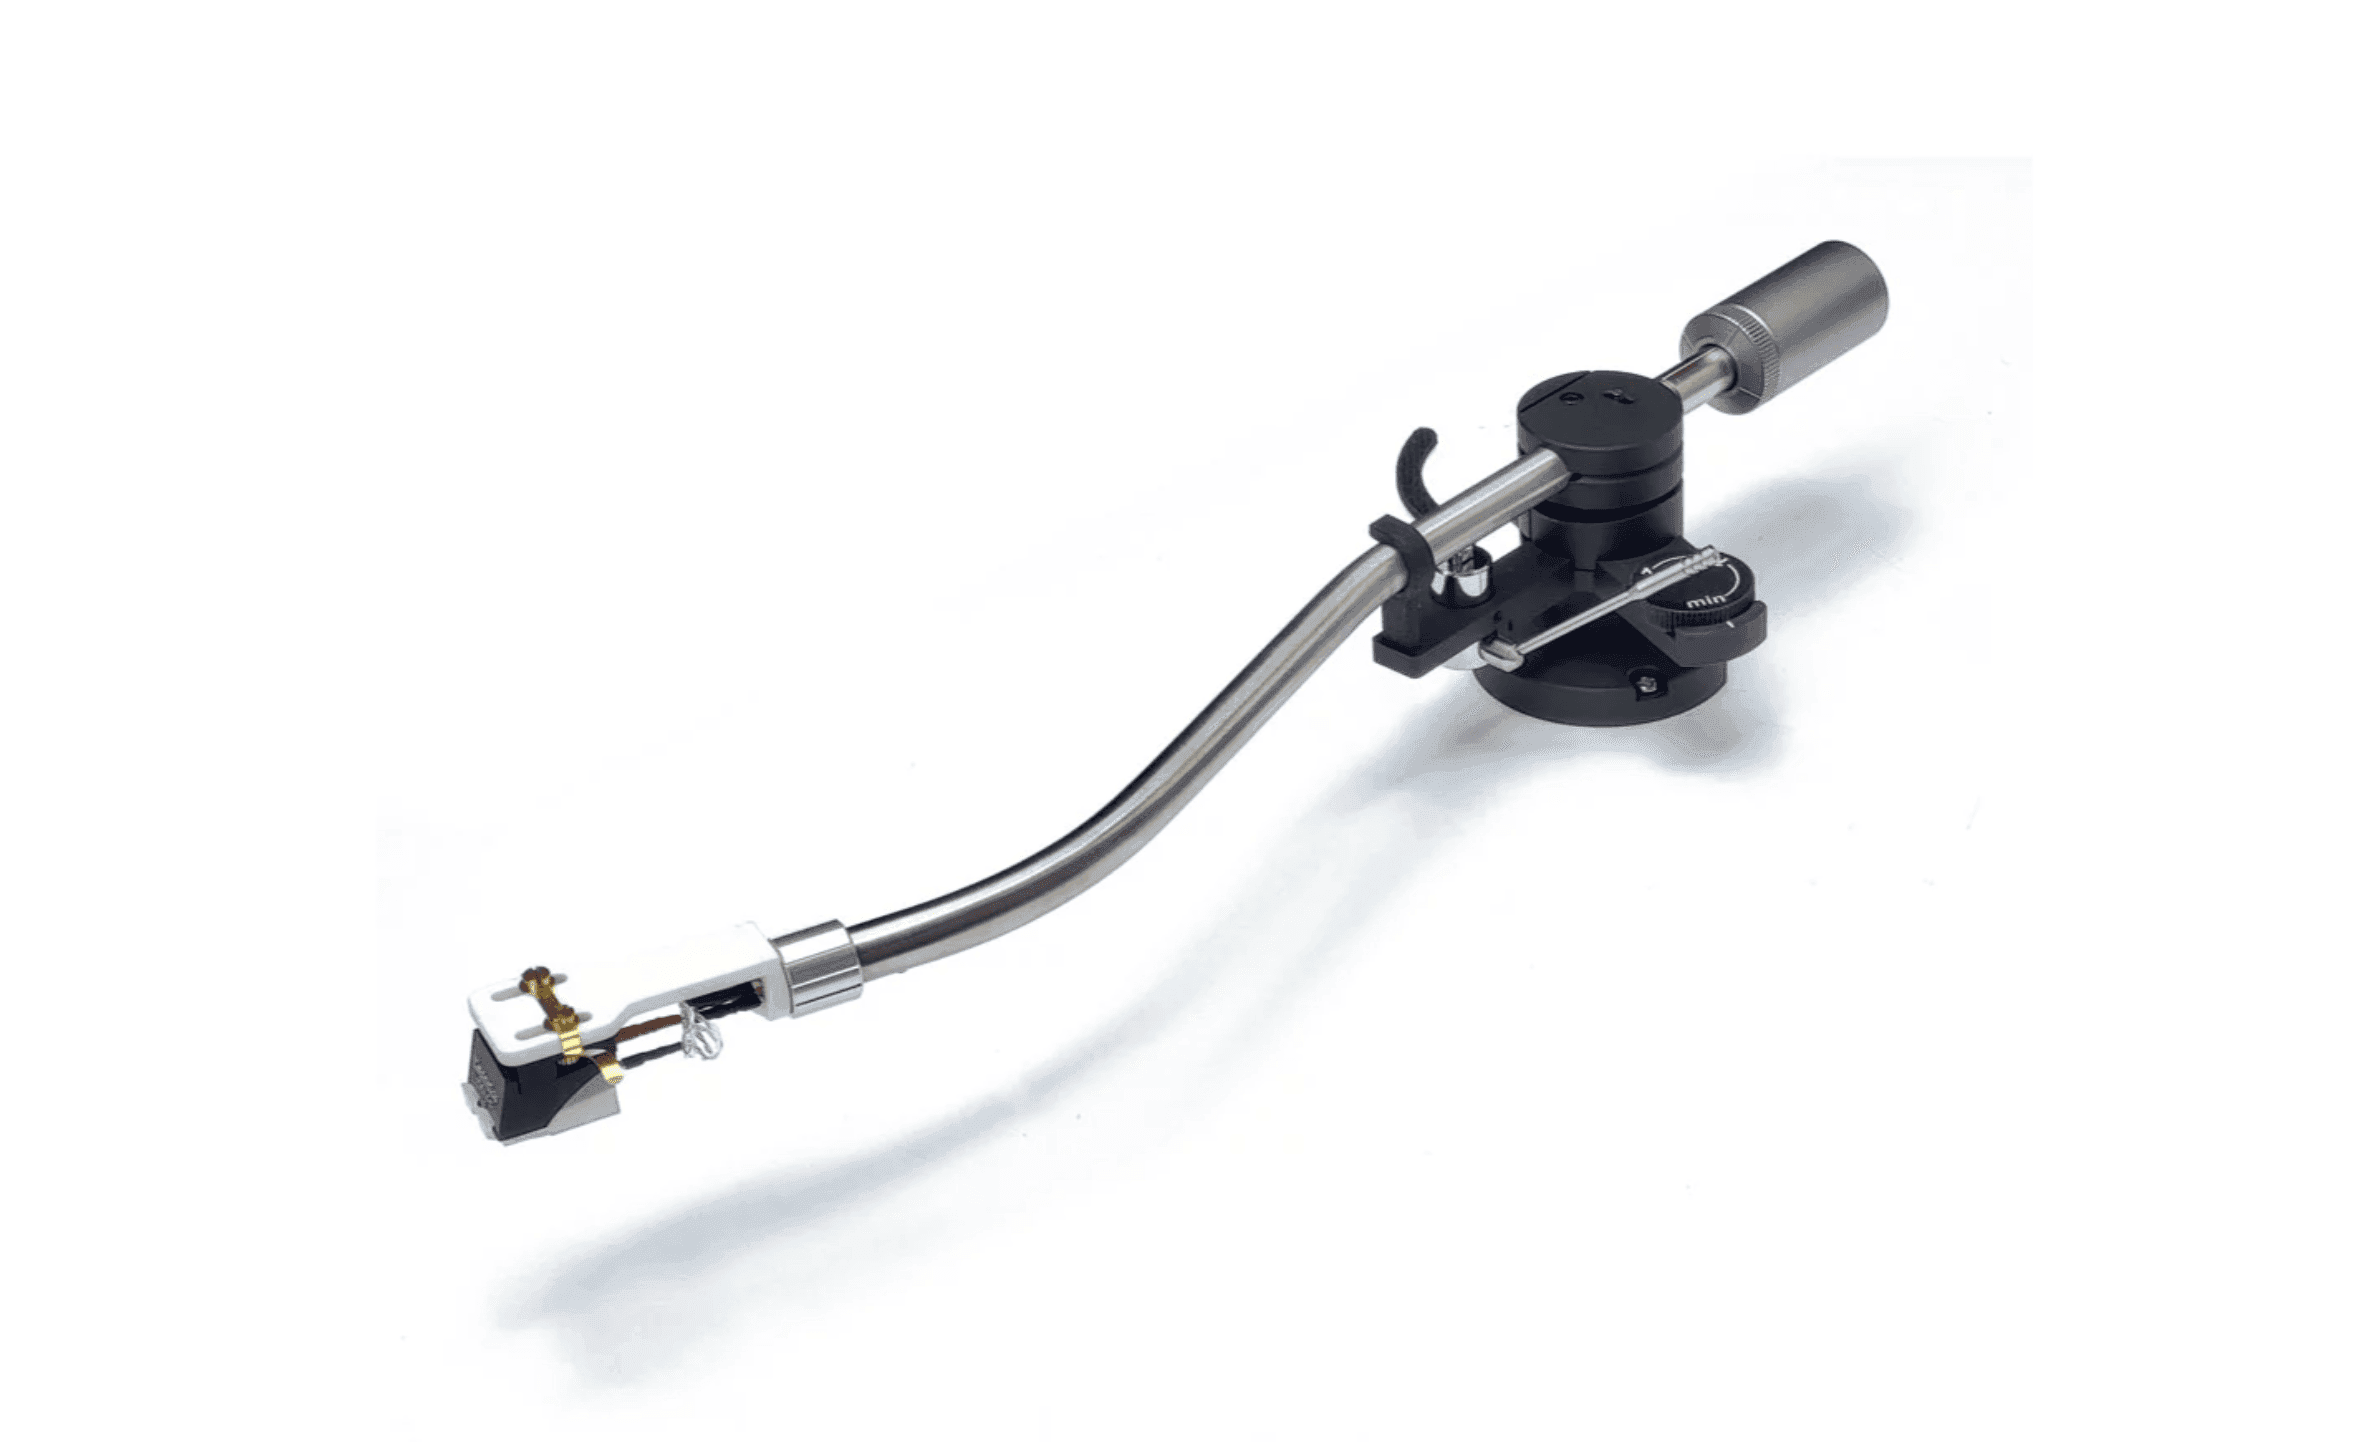 Korf Audio Introduces New Flagship Ceramic Tonearms at Munich High End Expo